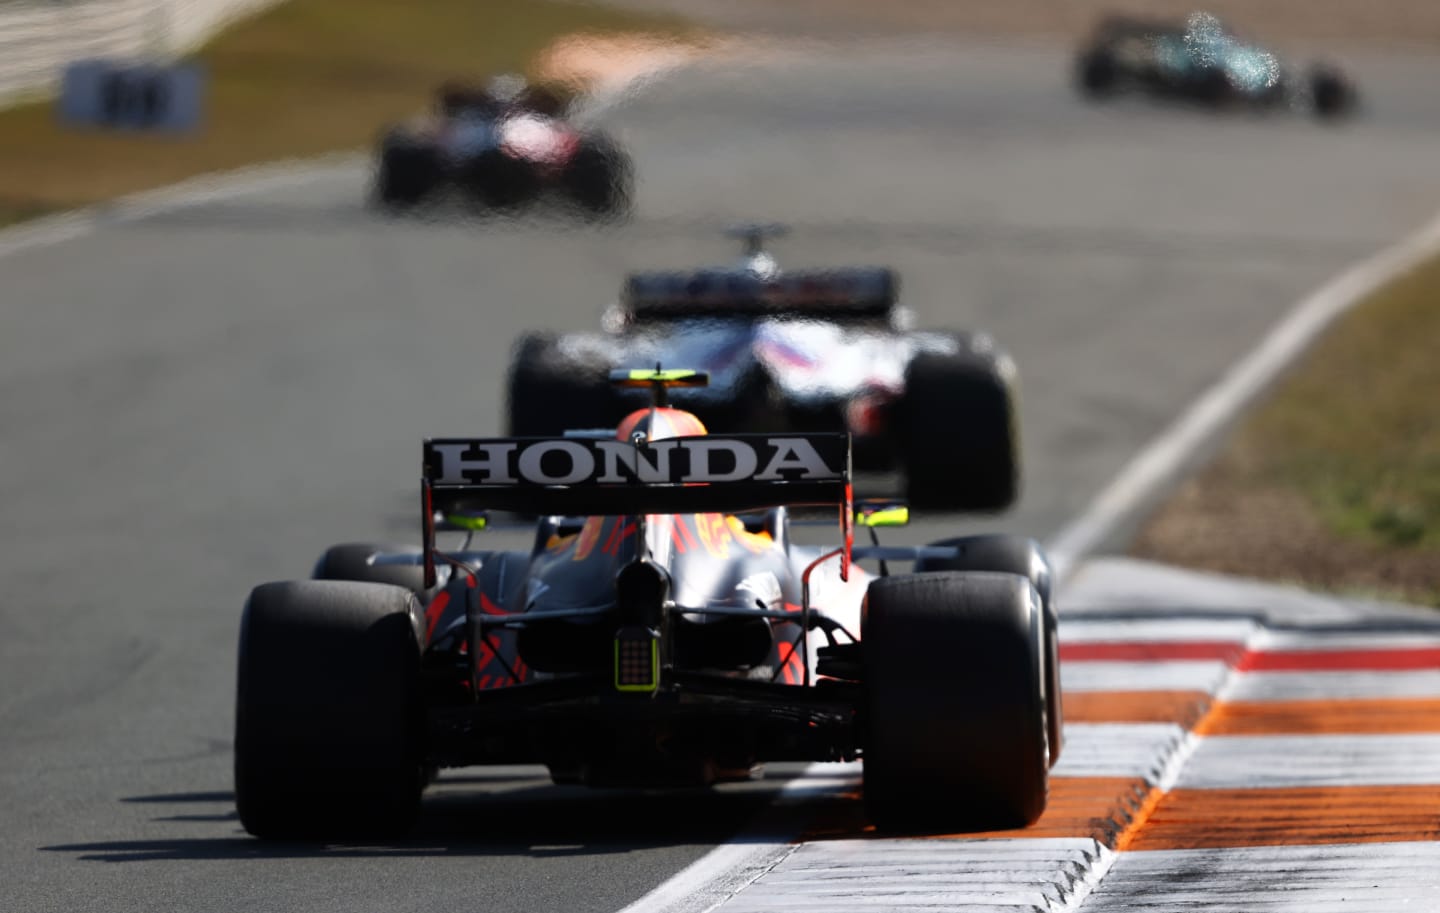 ZANDVOORT, NETHERLANDS - SEPTEMBER 05: Sergio Perez of Mexico driving the (11) Red Bull Racing RB16B Honda during the F1 Grand Prix of The Netherlands at Circuit Zandvoort on September 05, 2021 in Zandvoort, Netherlands. (Photo by Bryn Lennon/Getty Images)